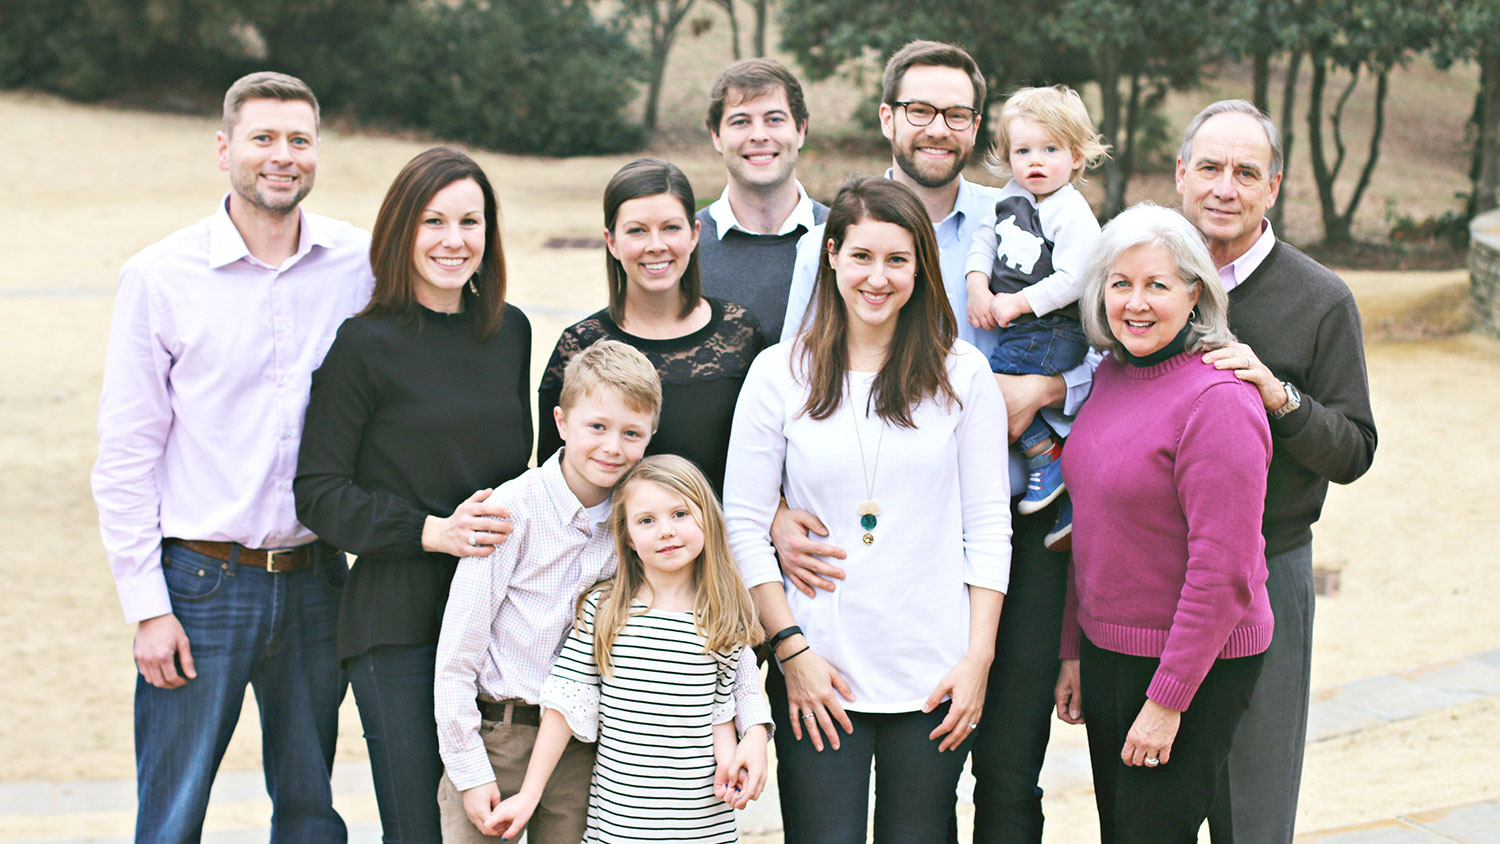 Tony Sigmon, far right, is shown with his family. In the front row, from left, are grandchildren Carson and Finley Capps. In the second row, from left, are Erin Capps, Hannah Abernethy, Sara Sigmon and Nancy Sigmon. In the back row, from left, are Cory Capps, Richard Trevorrow, Daniel Sigmon and grandchild Jude Sigmon.